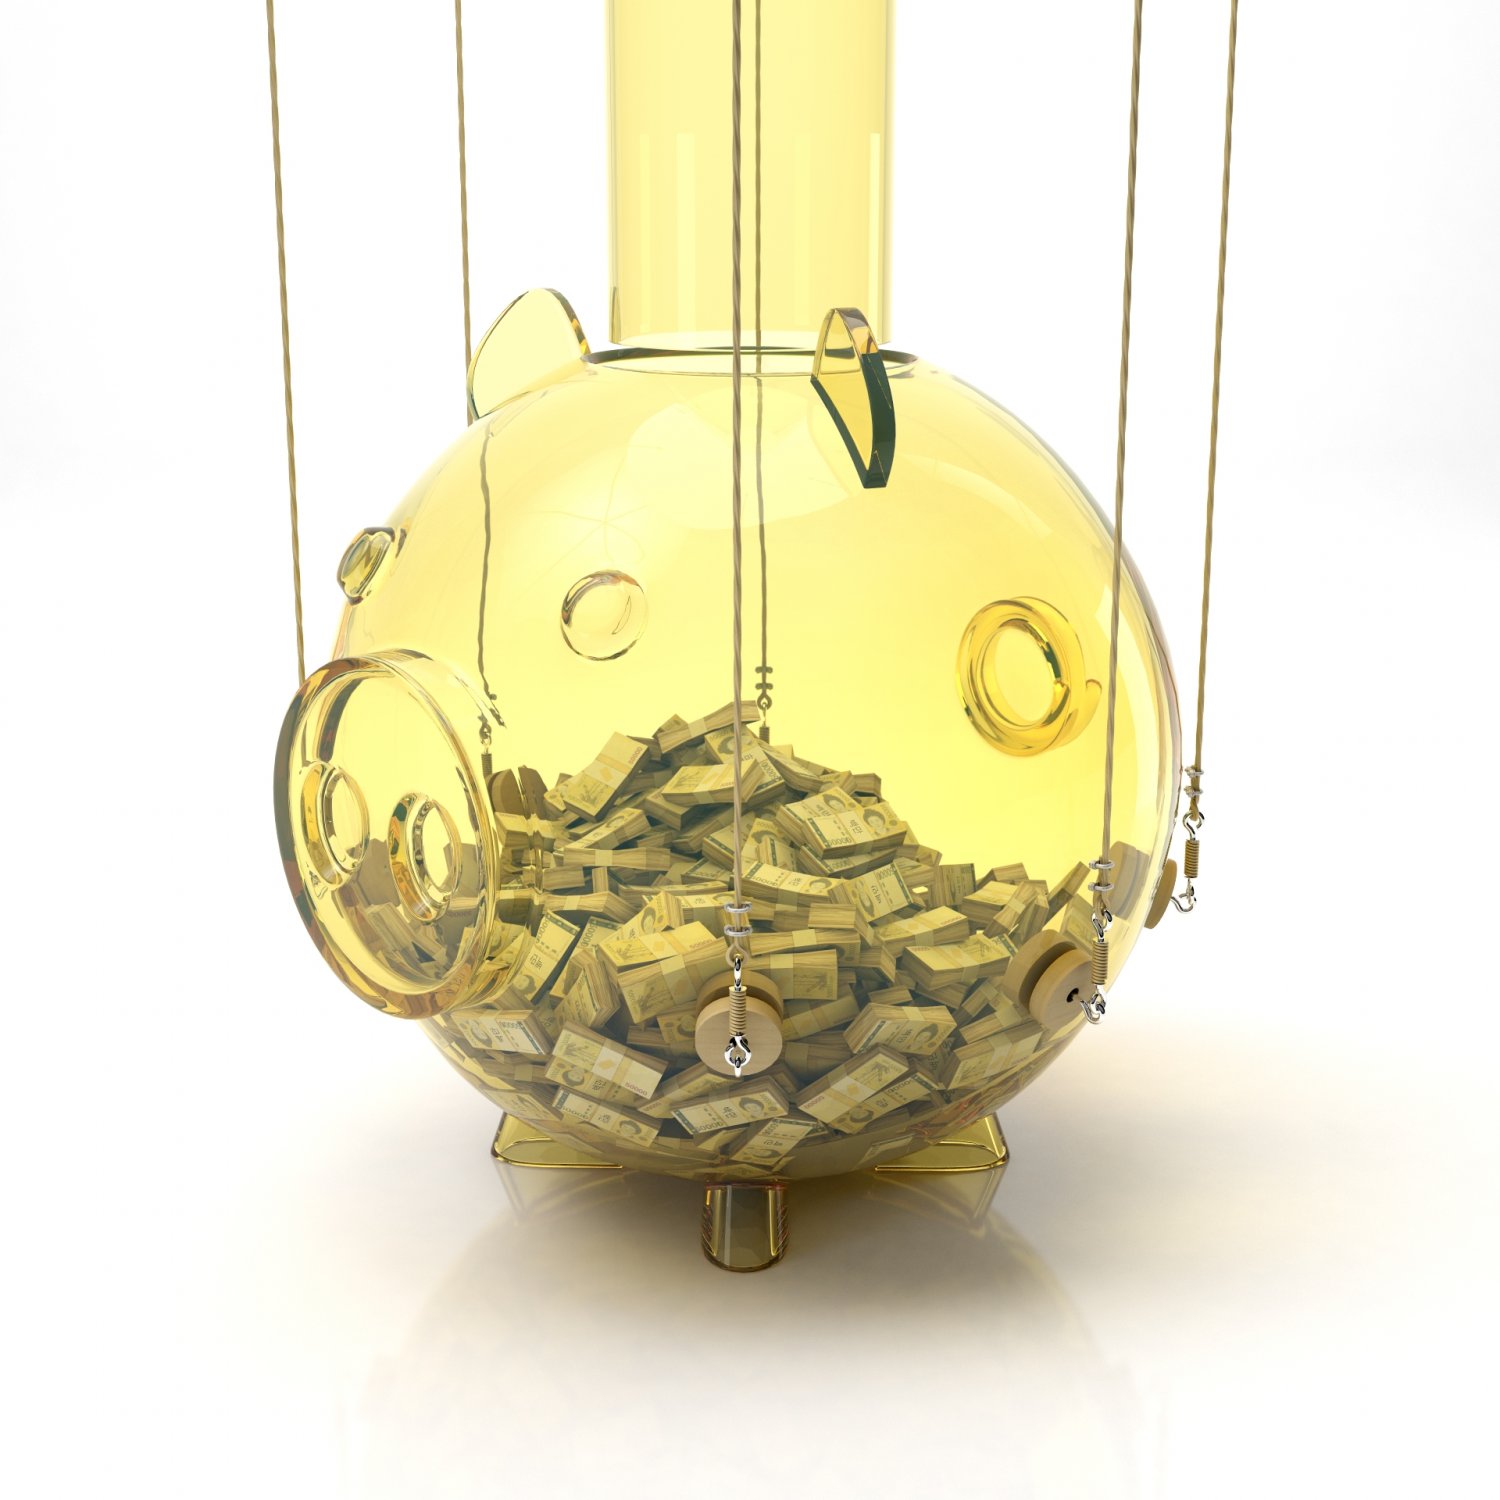 Glass piggy bank with money from series the squid game Netflix 3D model